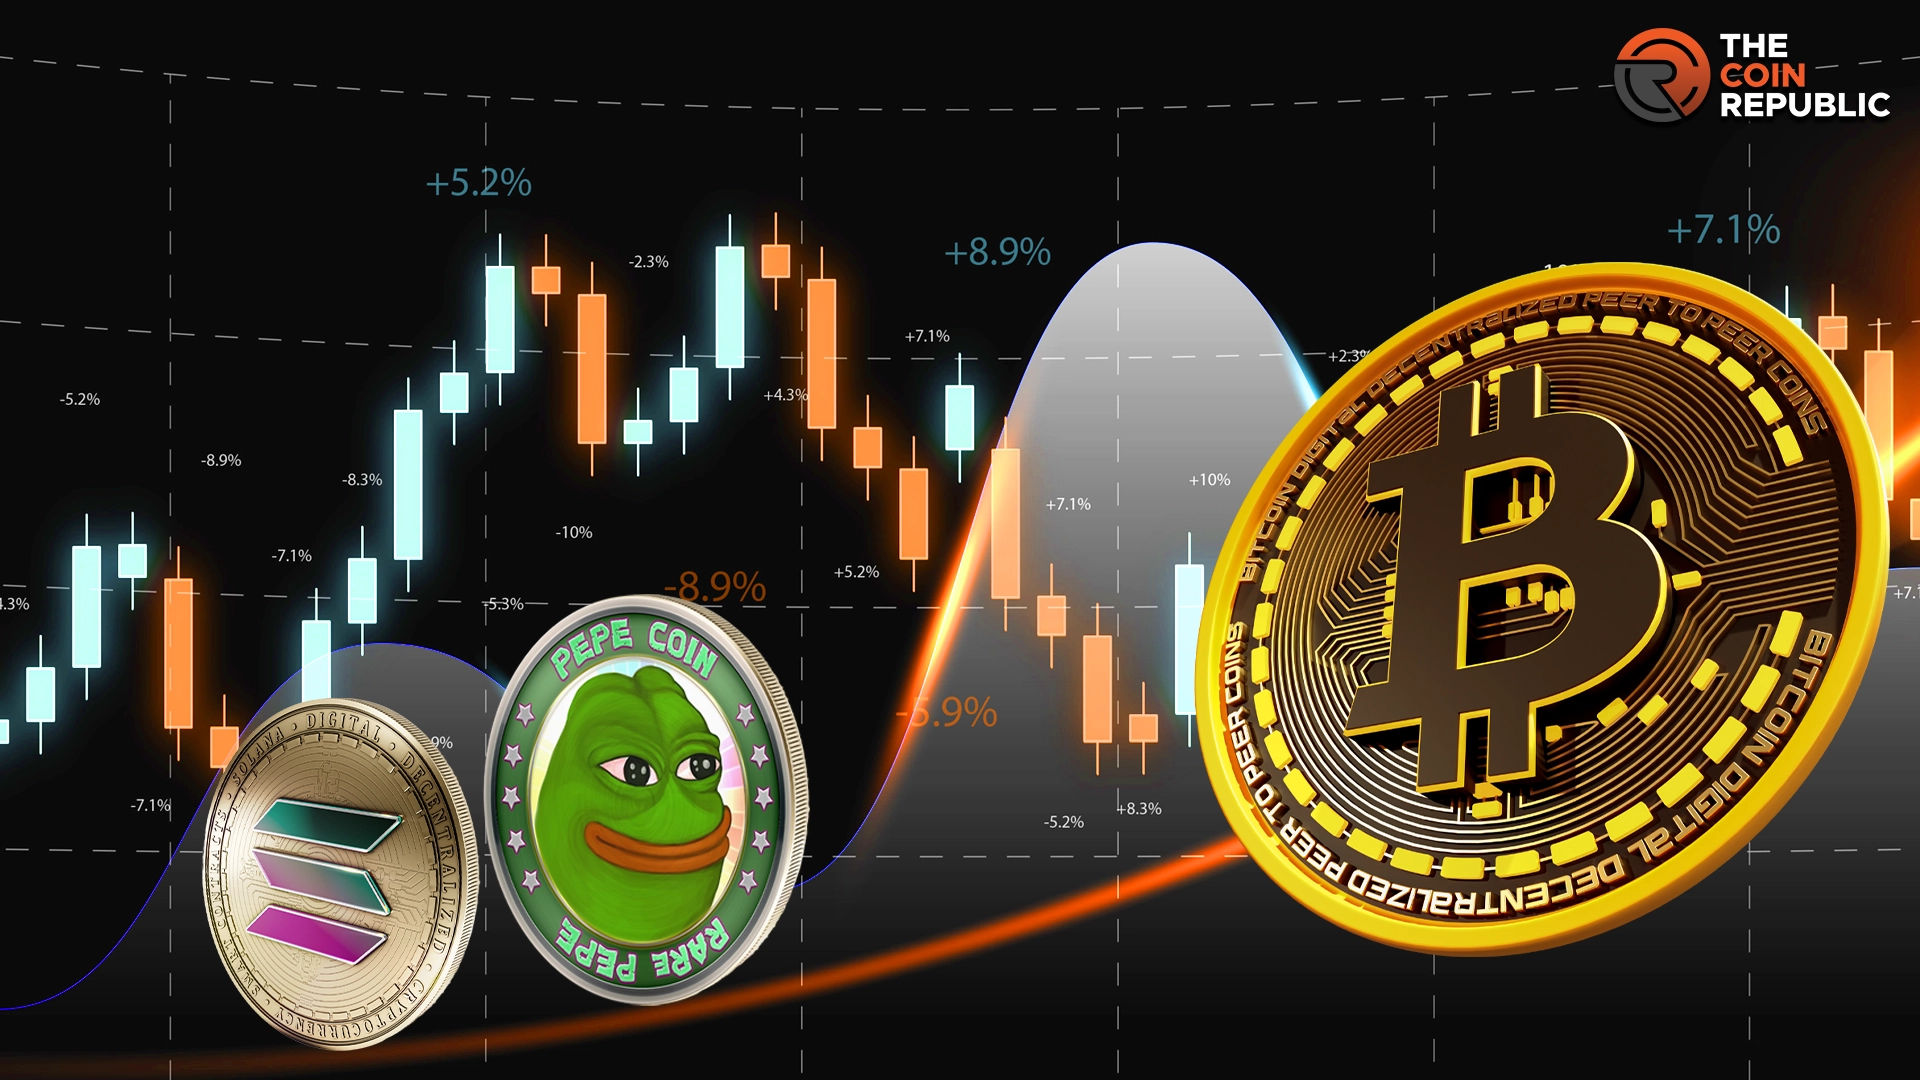 Bitcoin Price Action Can Severely Impact SOL, PEPE Price: Here’s How